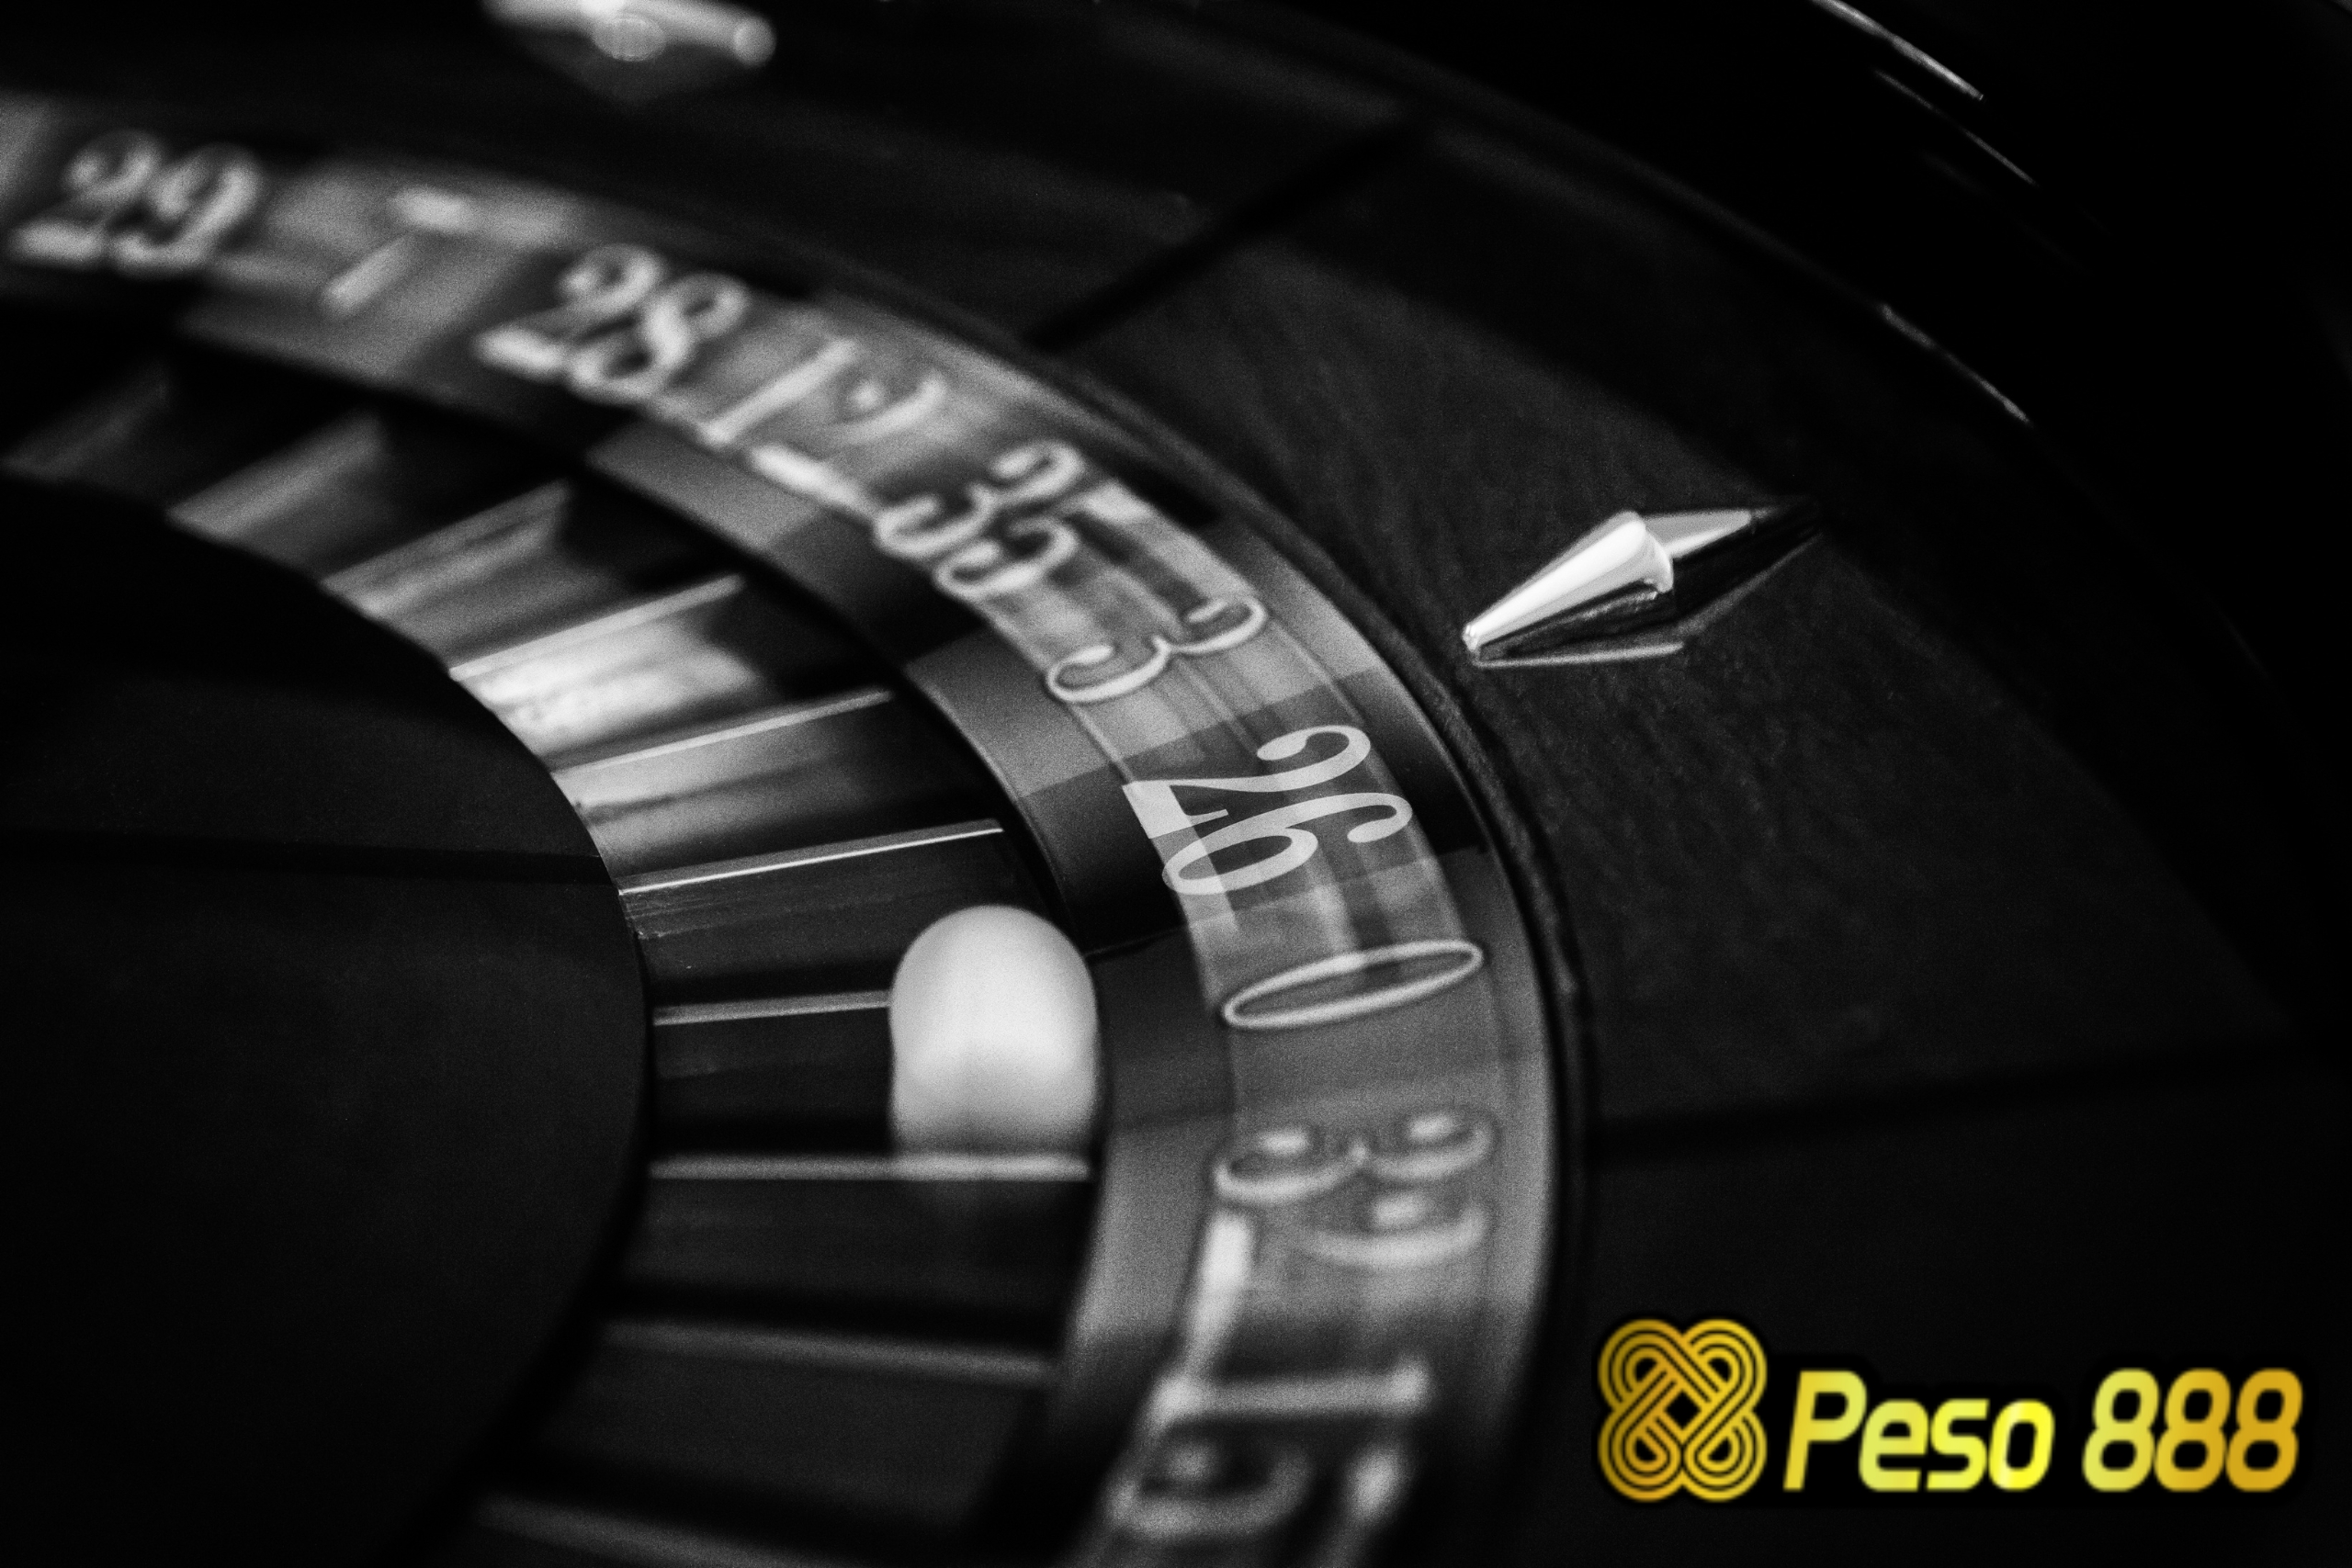 Betso888 Login: Your Ticket to Exciting Casino Action in the Philippines